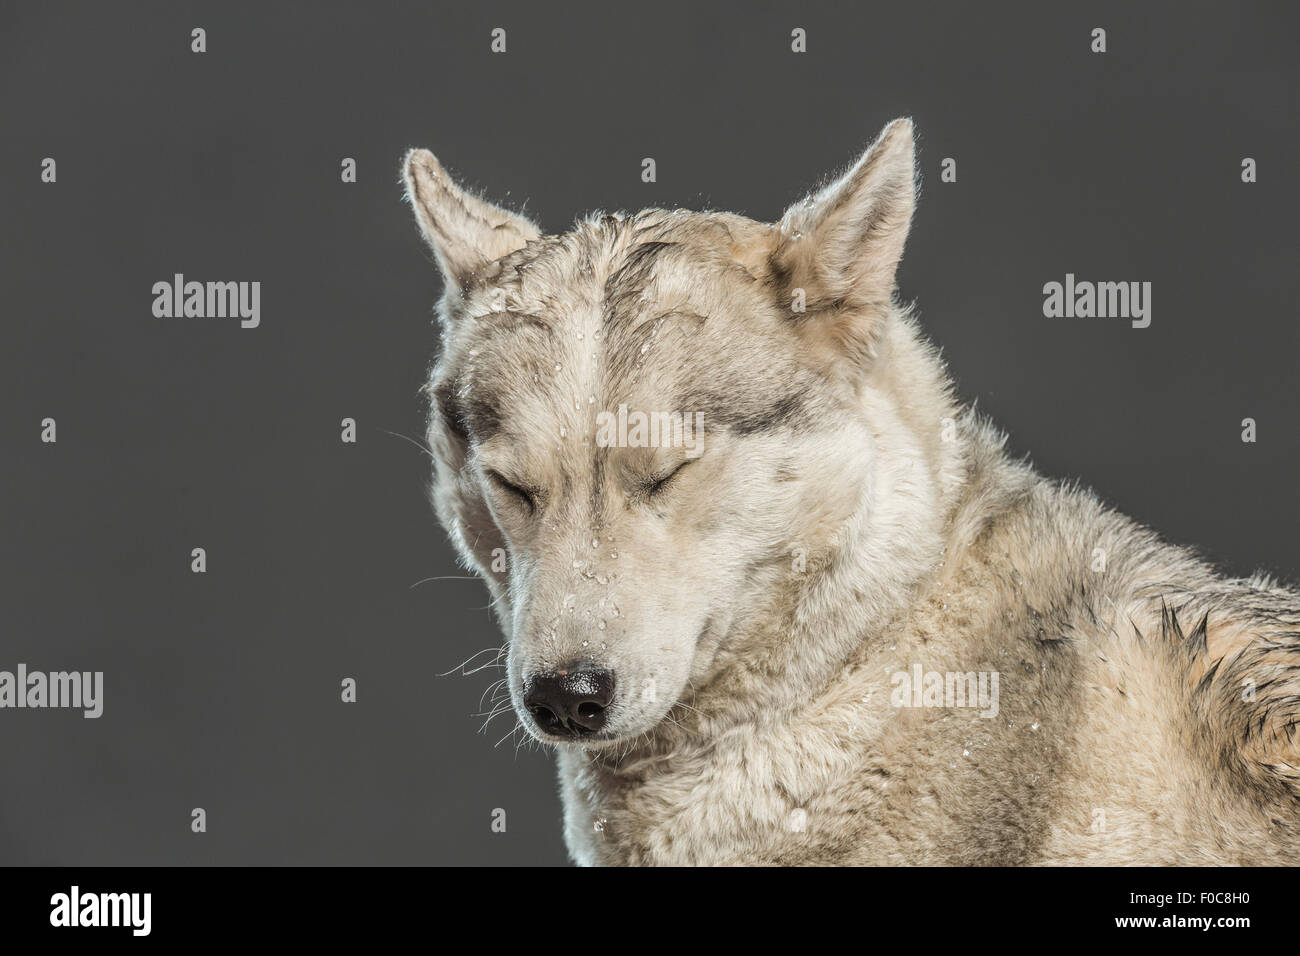 Siberian Husky with eyes closed over gray background Stock Photo